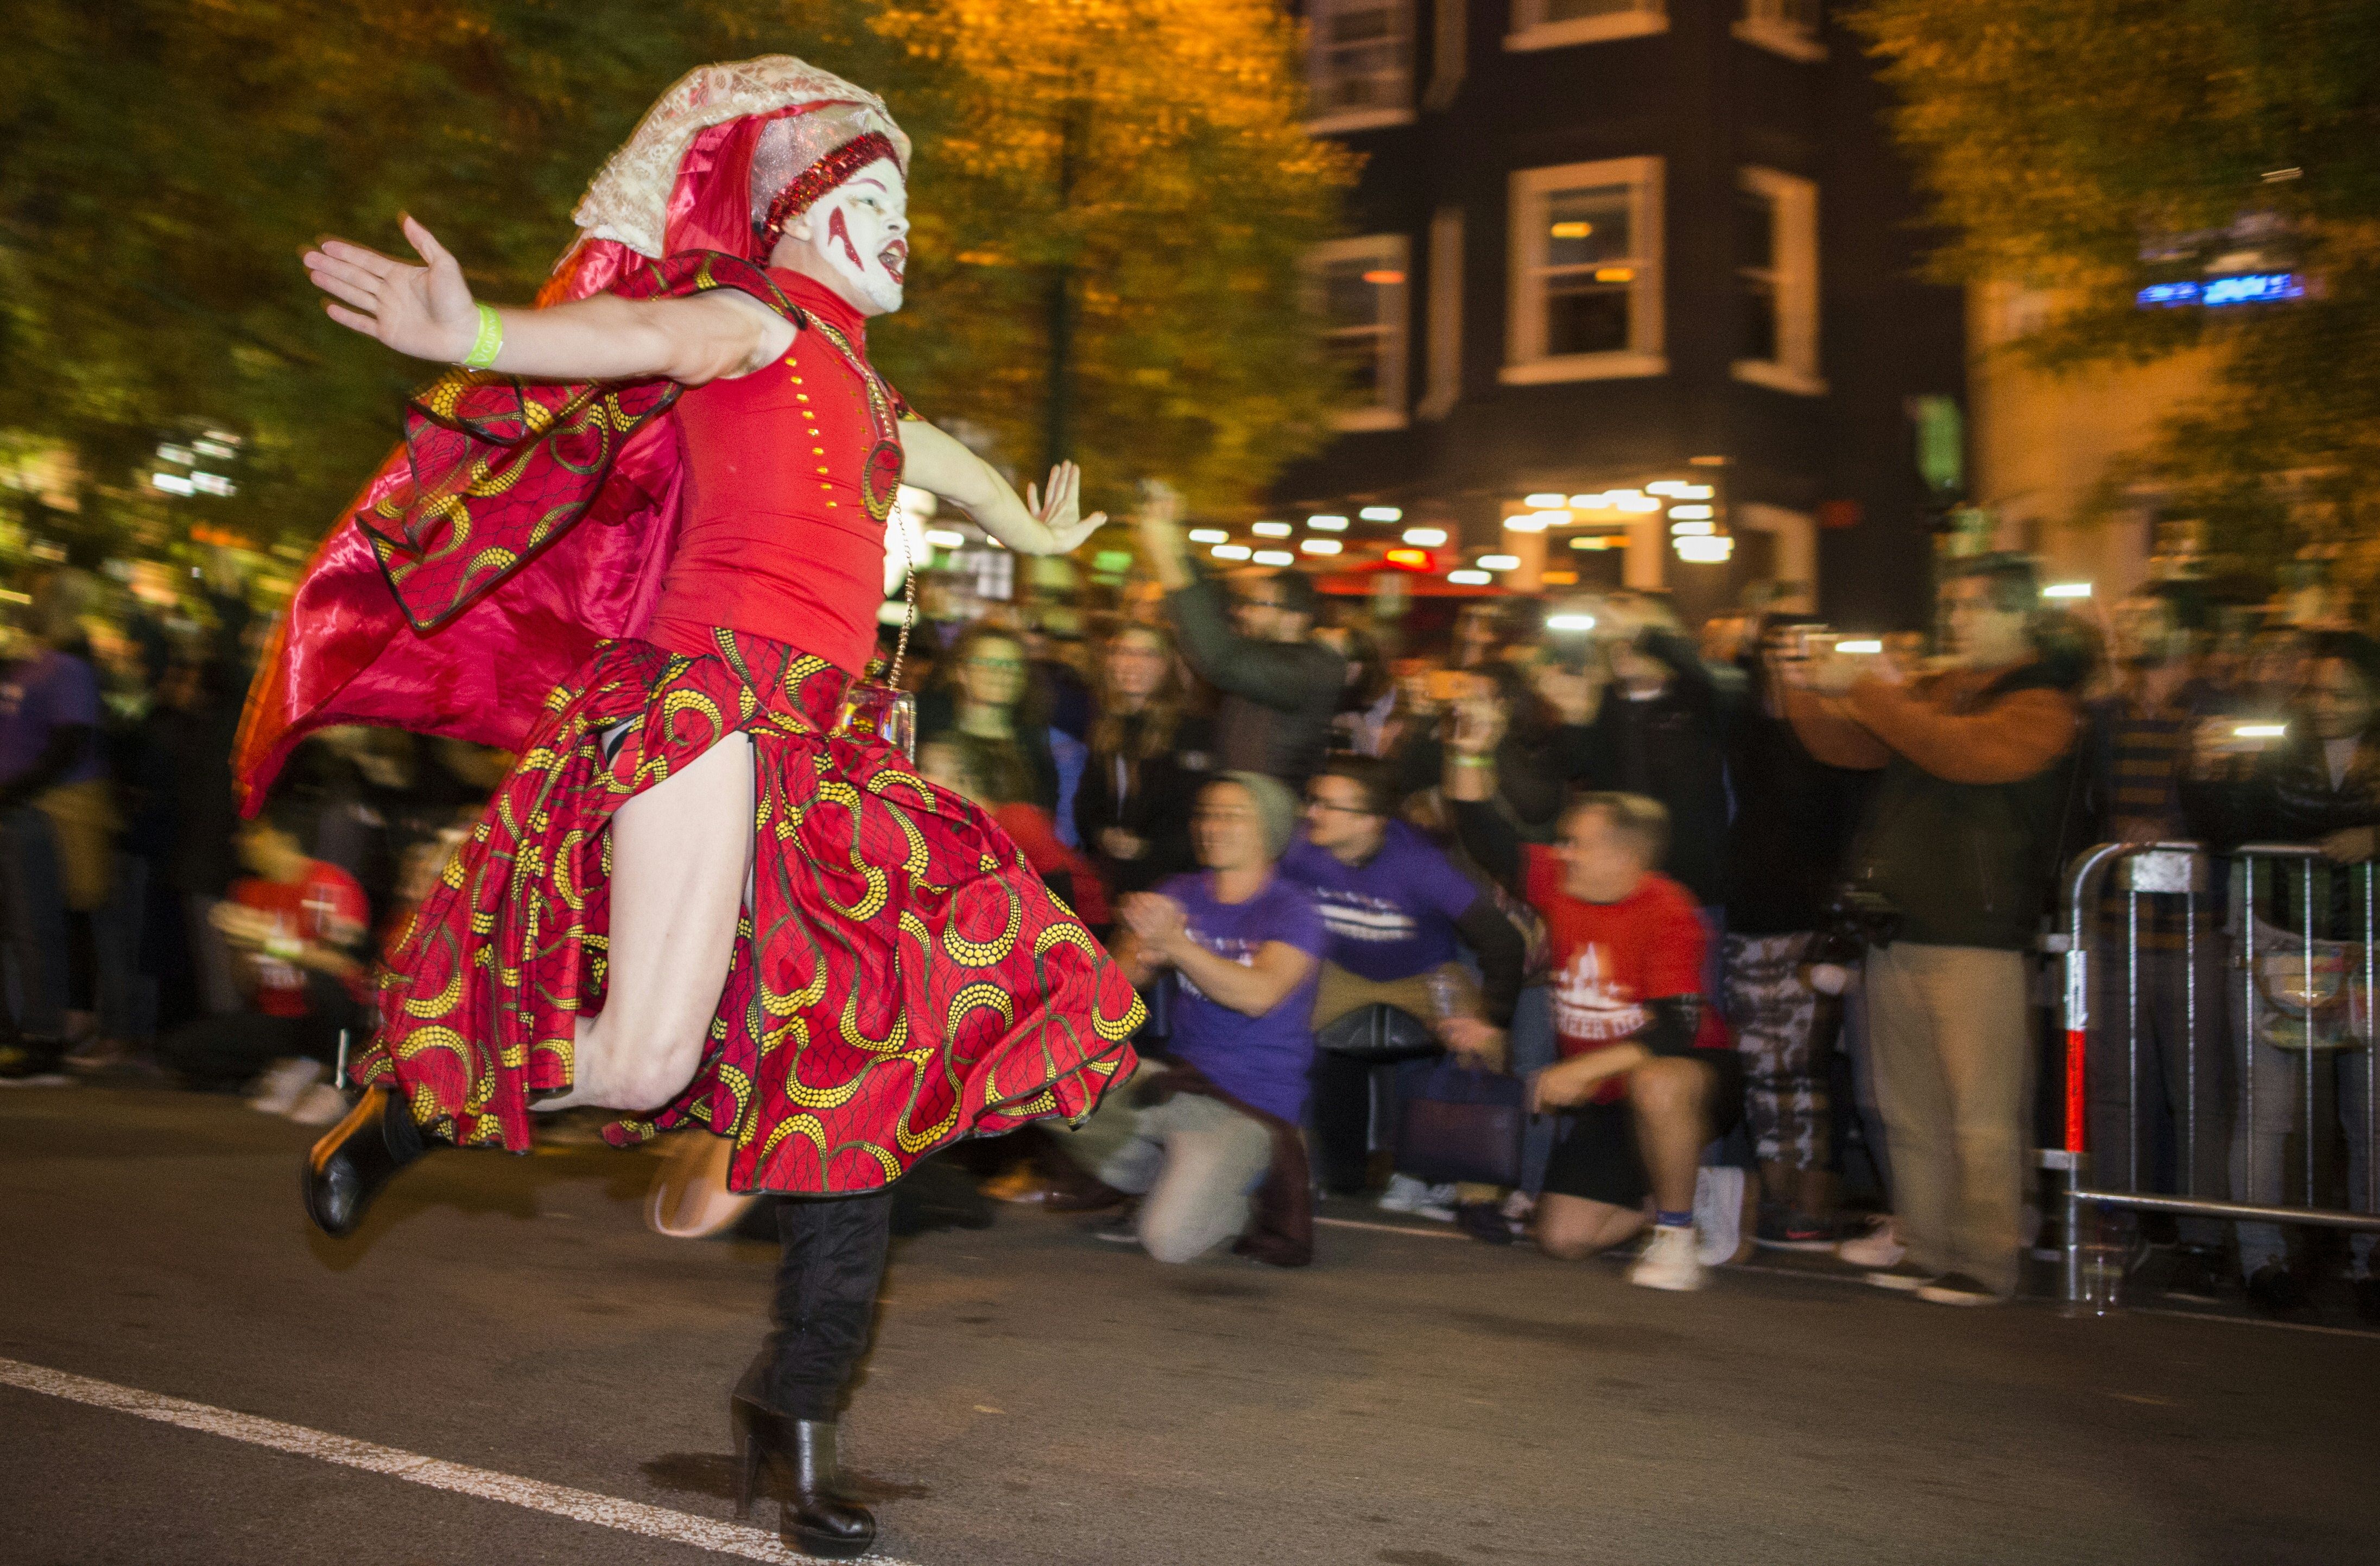 A person running with arms outstretched on a city street. The person is wearing a drag outfit: a red skirt and red top with a red veil. They wear white makeup.